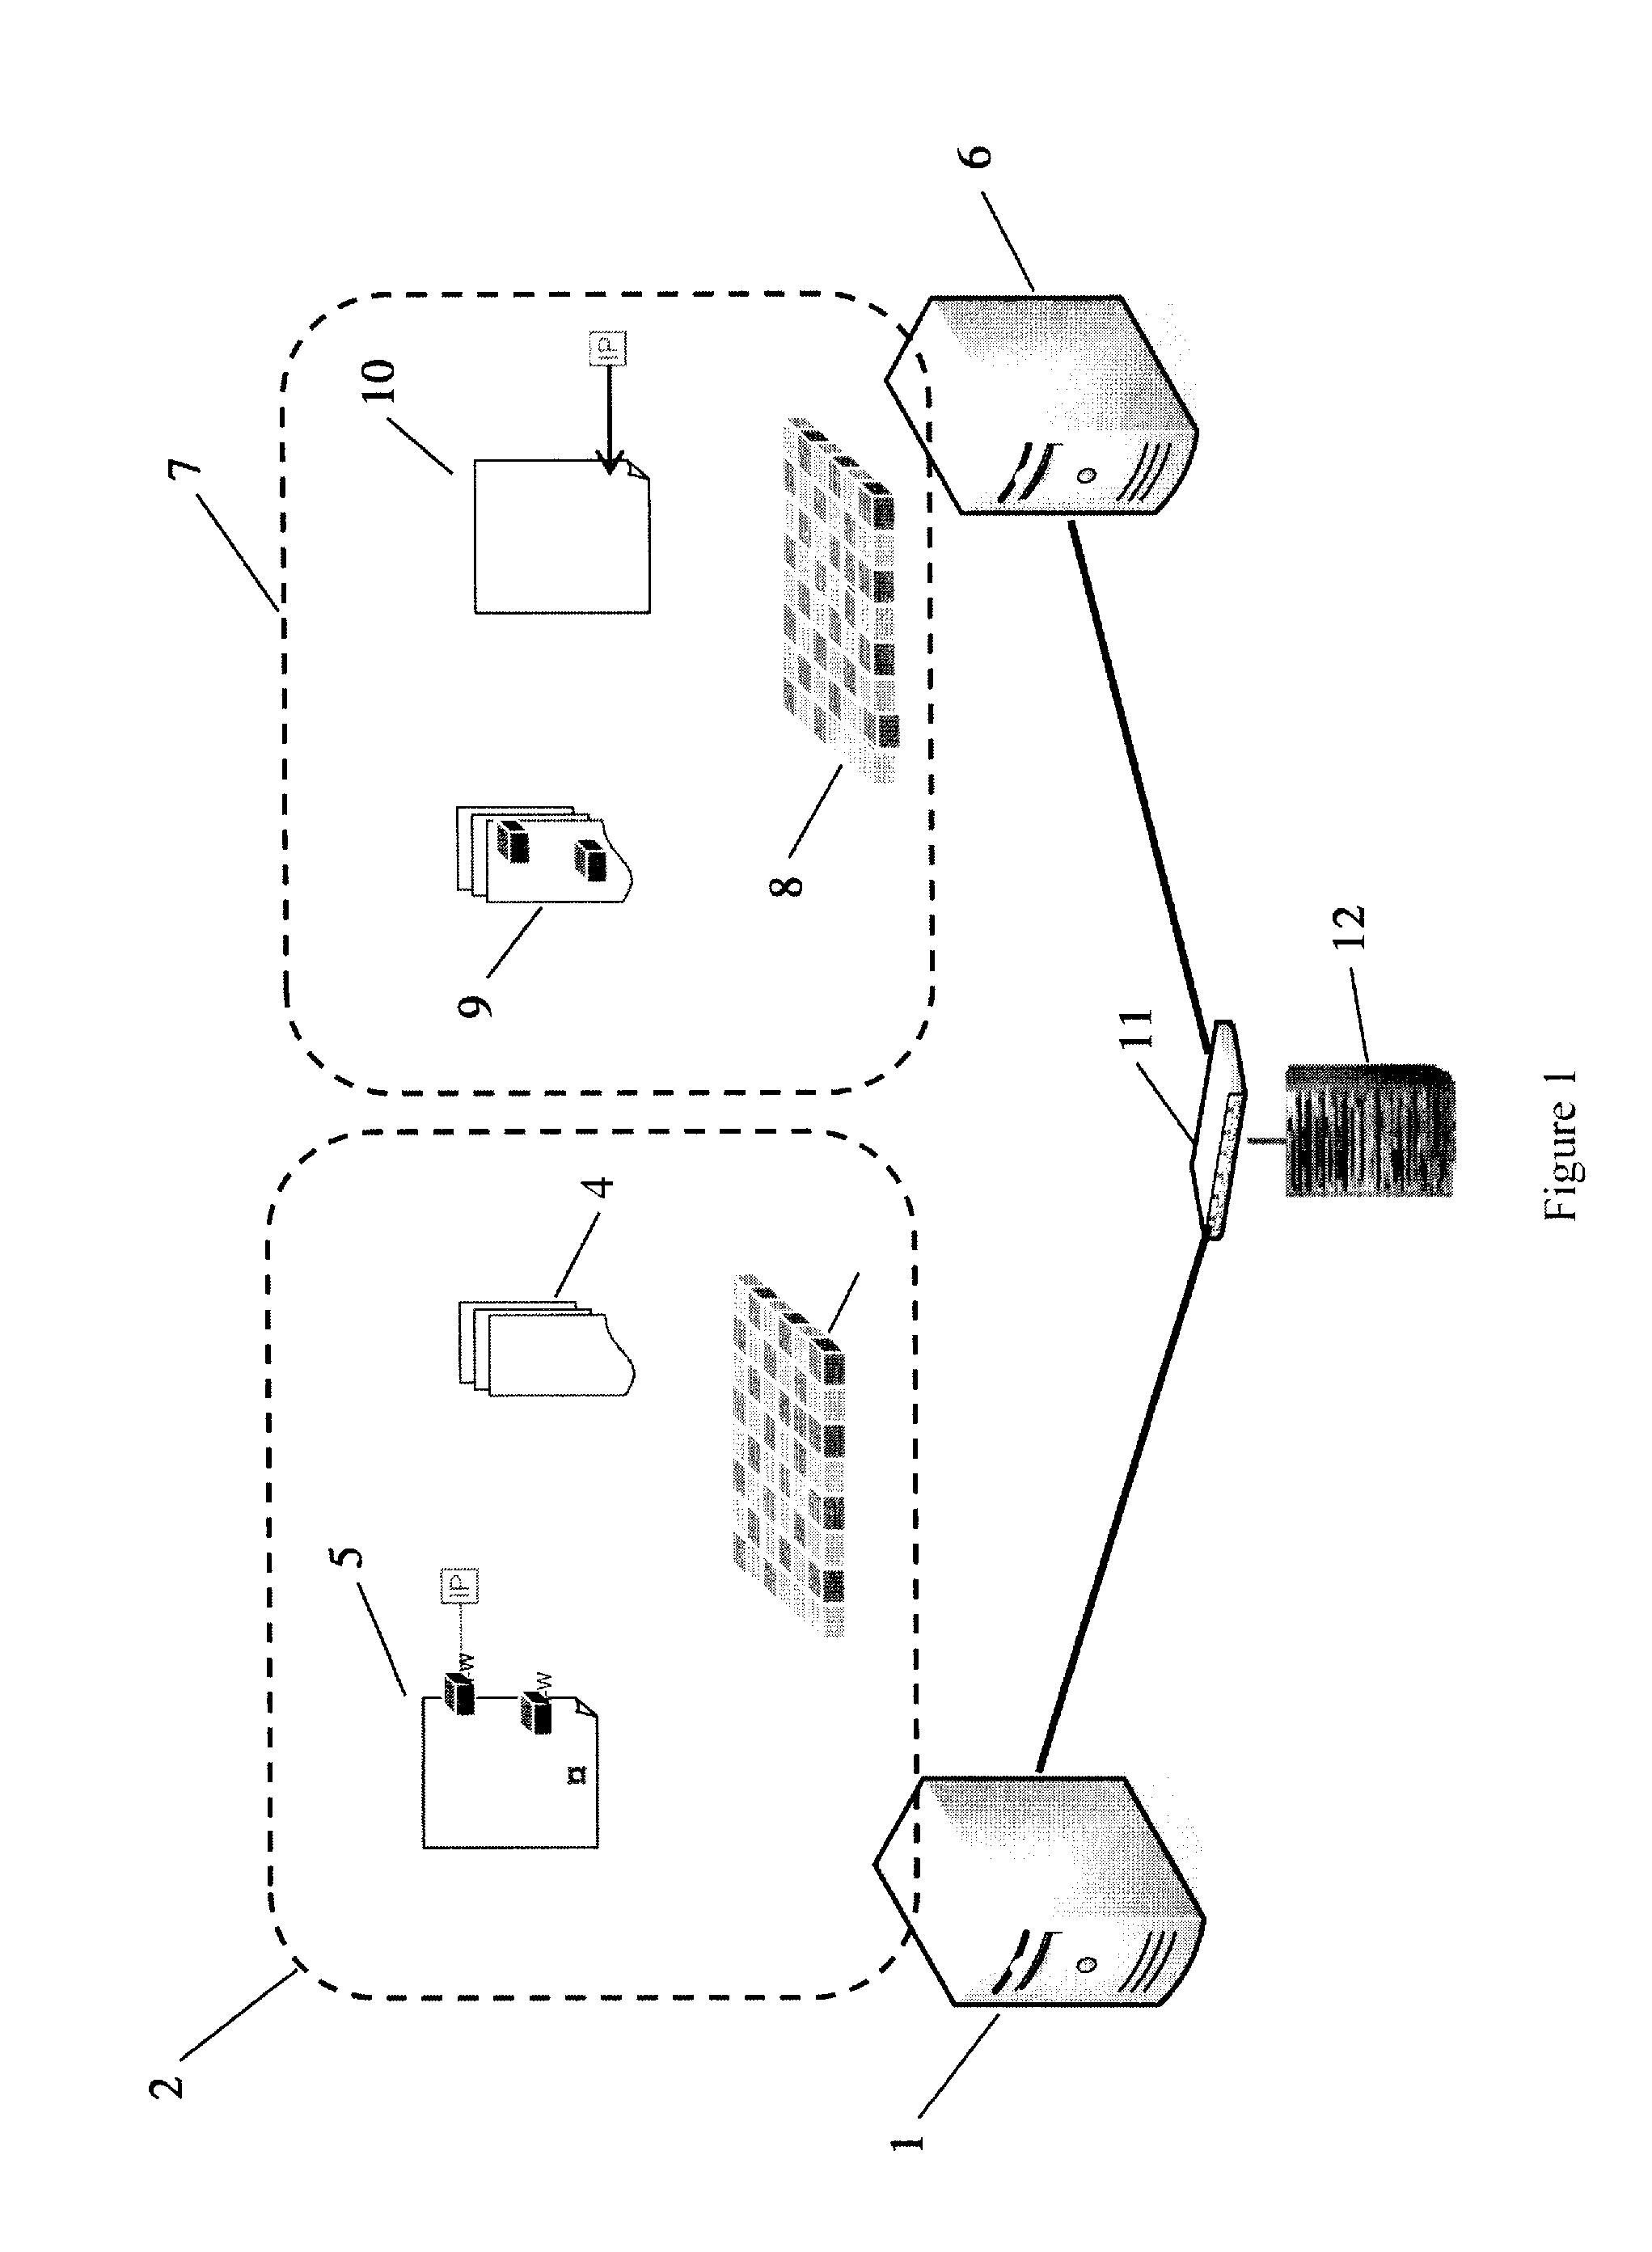 Method and computer system for making a computer have high availability